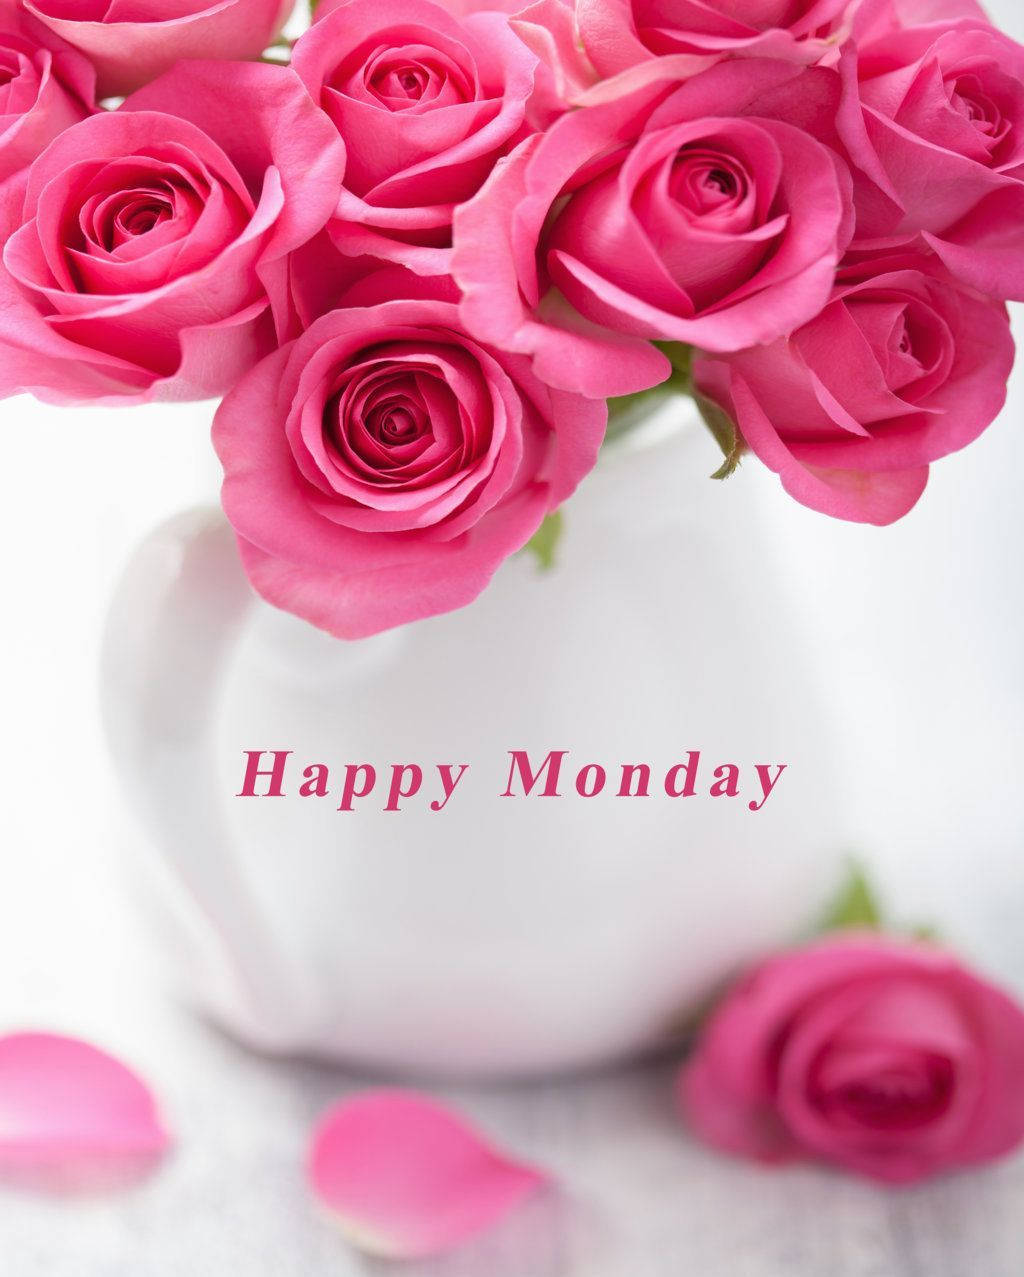 Bloom towards a lush week with Monday roses Wallpaper